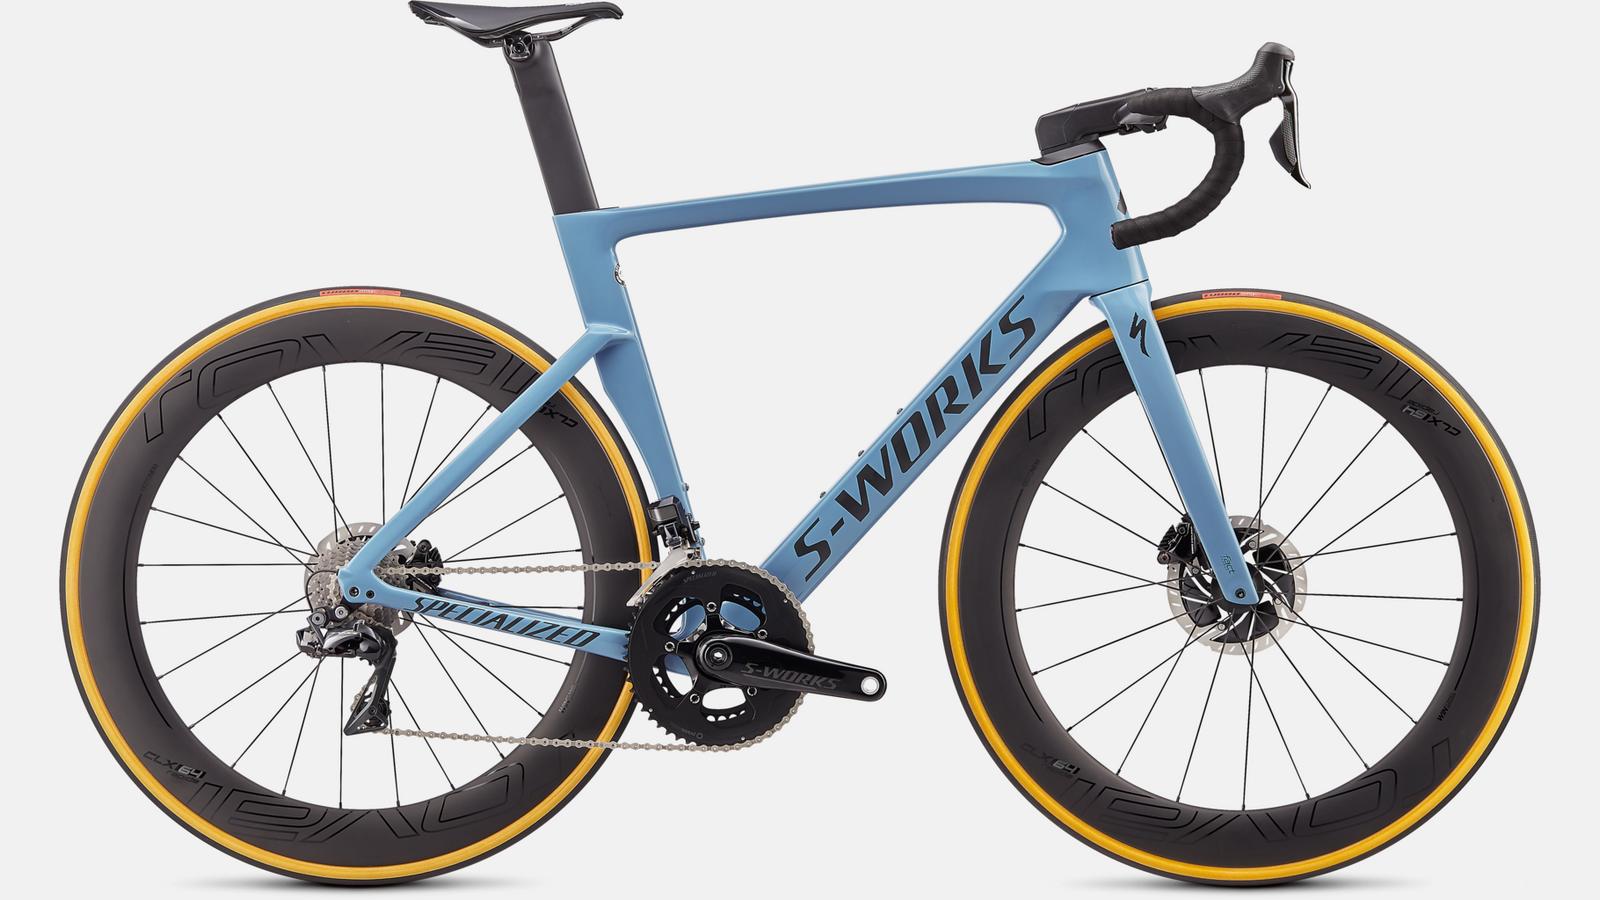 Paint for 2020 Specialized S-Works Venge - Gloss Storm Grey